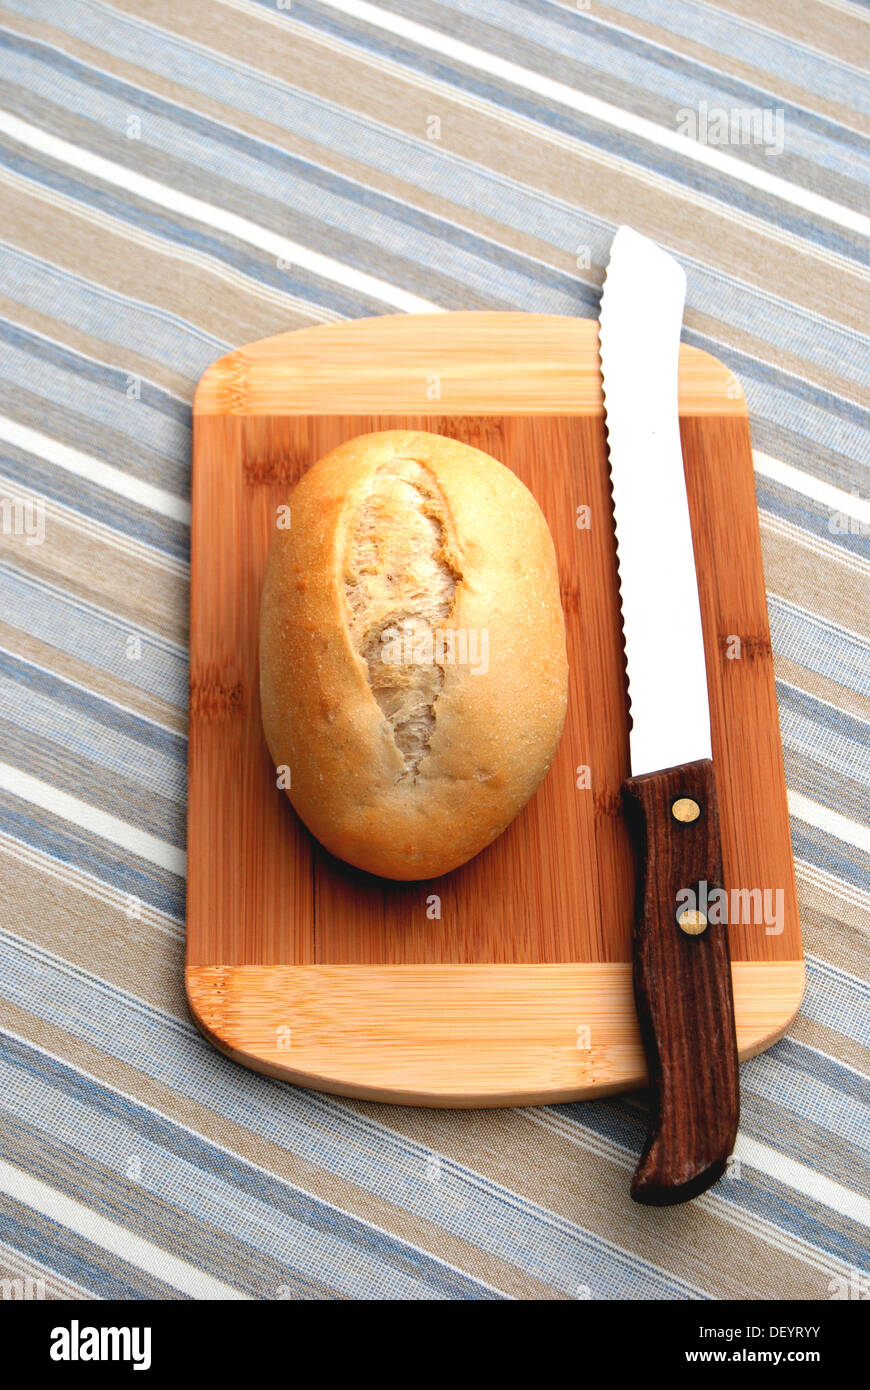 Bread roll on a wooden board, chopping board, bread knife, striped table cloth Stock Photo